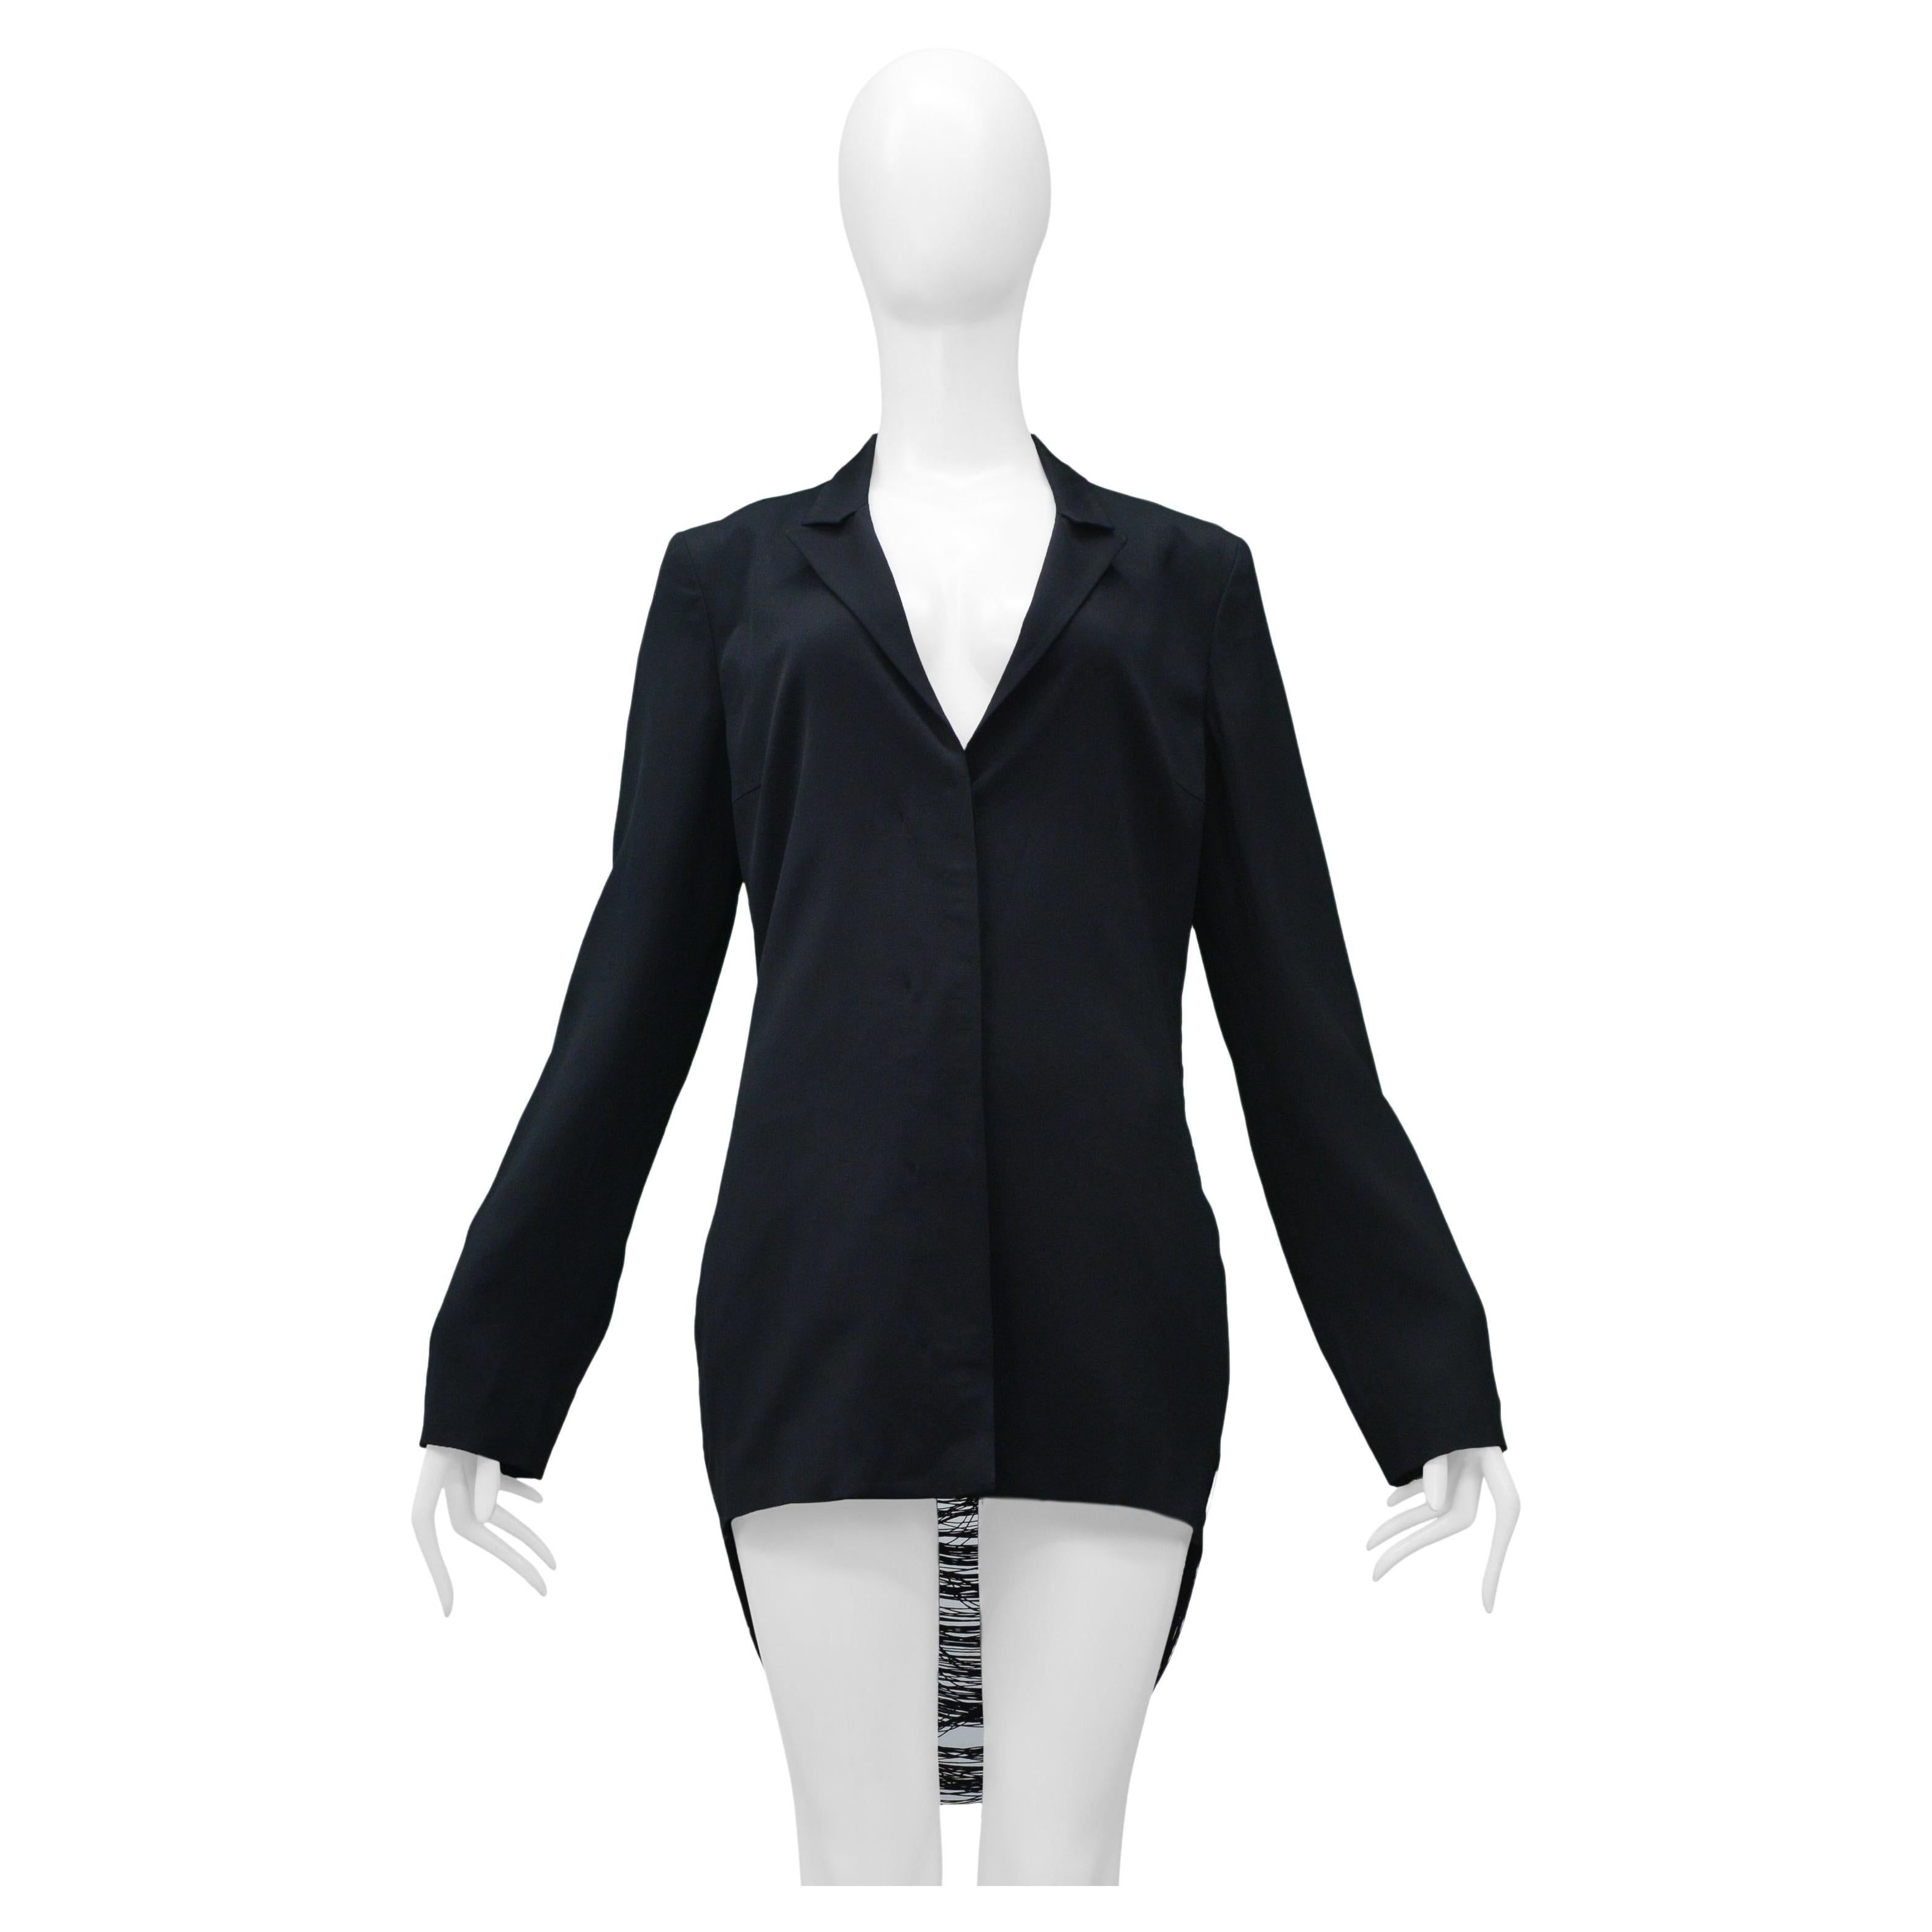 Resurrection Vintage is excited to offer a vintage Jil Sander by Raf Simons navy blazer with hidden button closure, notch collar, and open back with fringe.

Jil Sander Label
Size 36
53% Acetate, 45% Viscose, 2% Spandex
2009 Collection 
Excellent